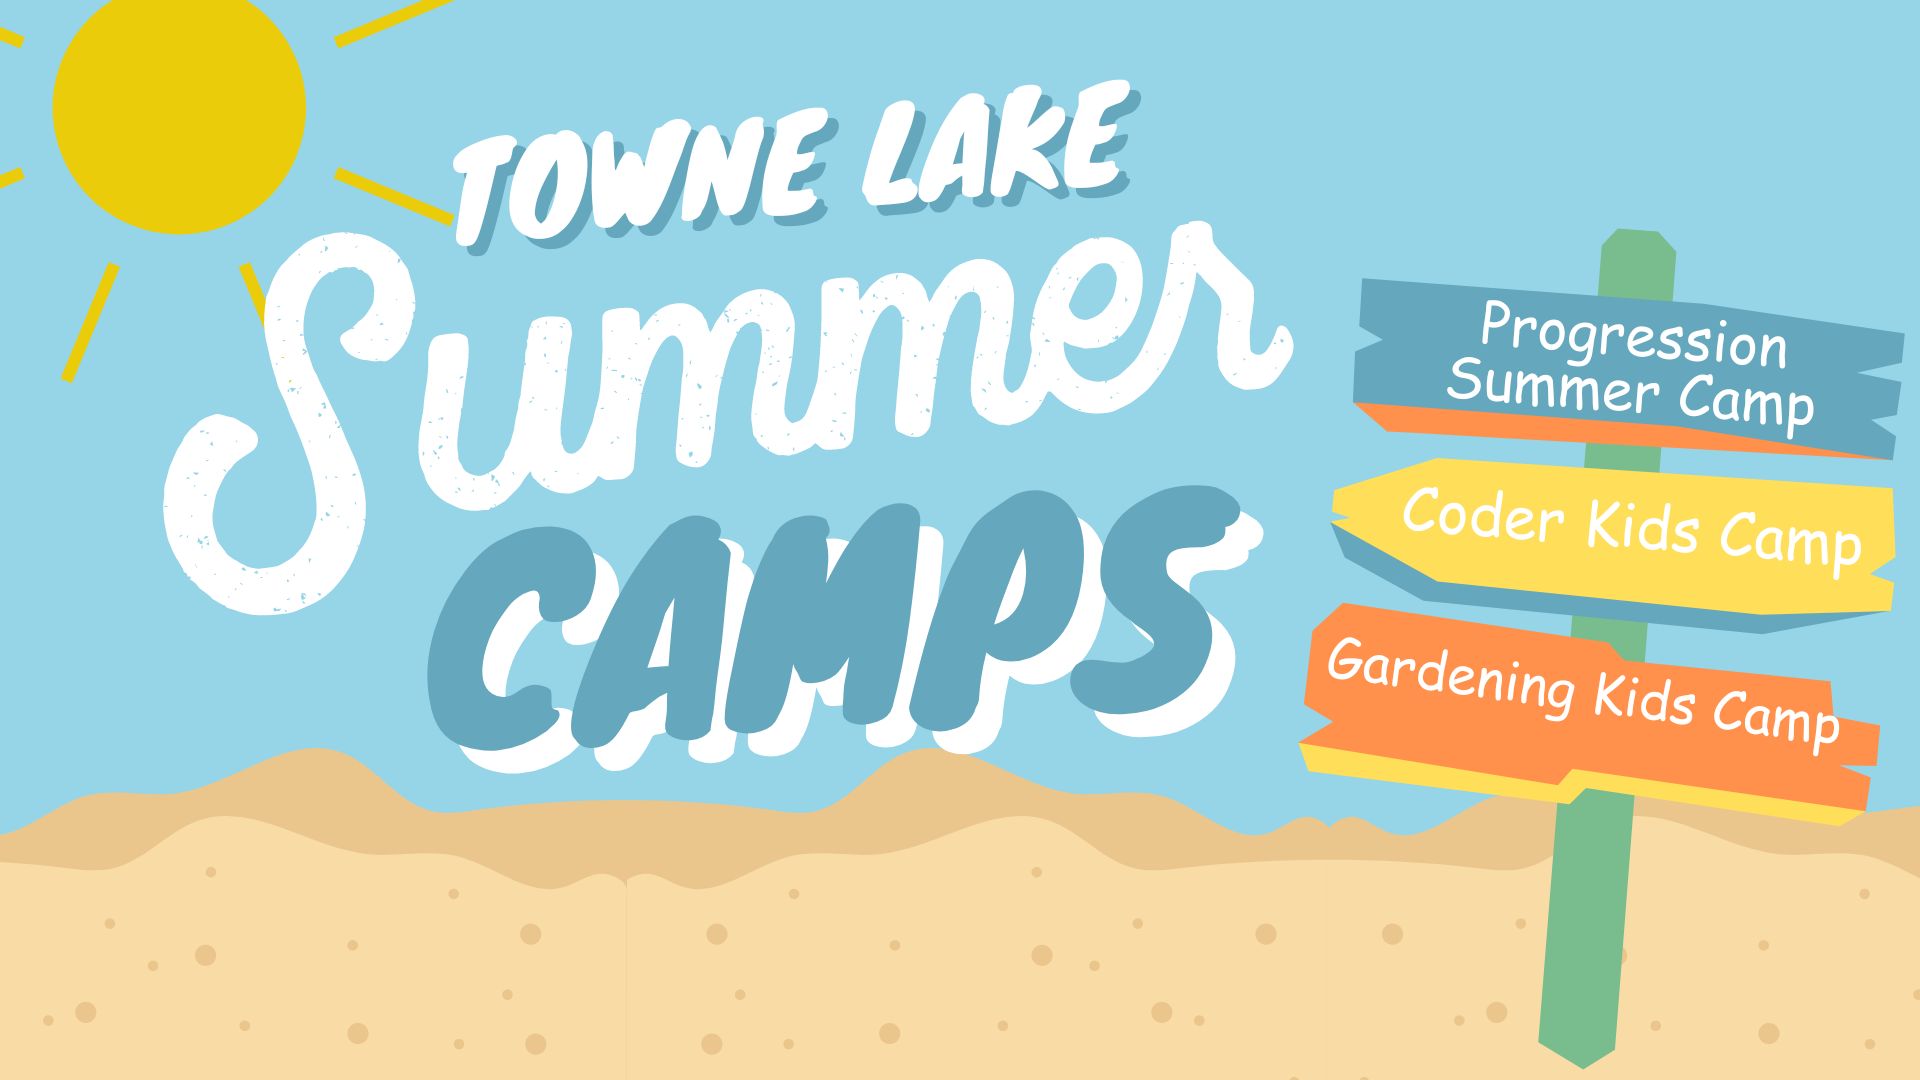 Towne Lake Summer Camps